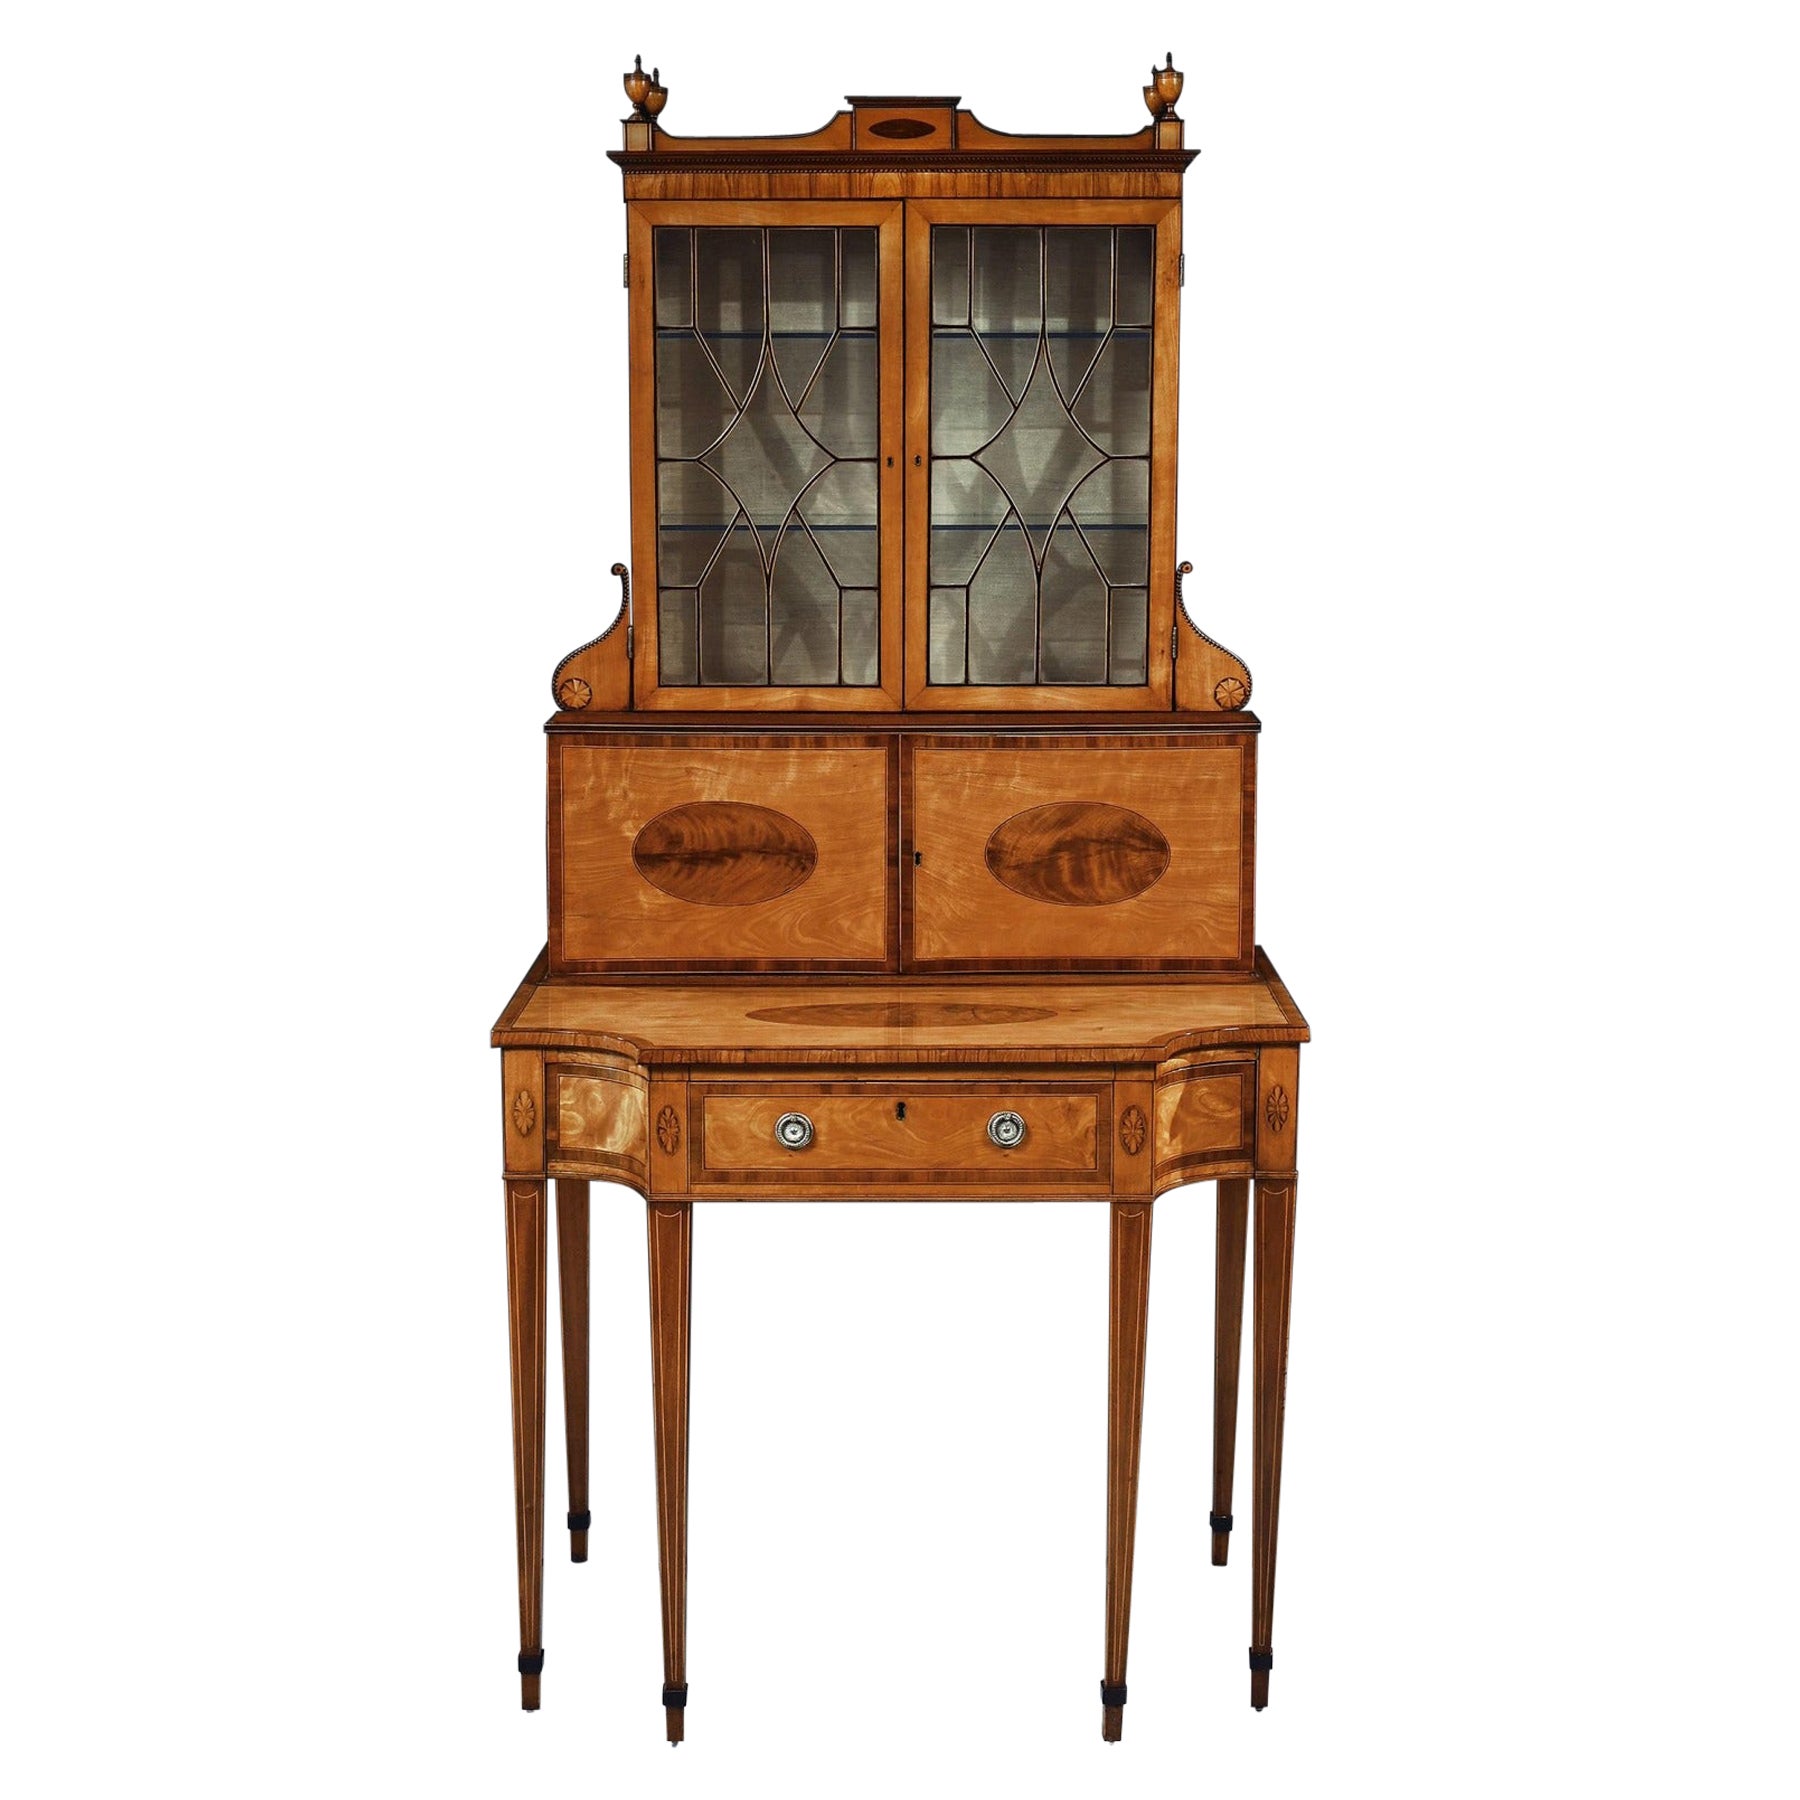  An Important 18th Century George Iii Satinwood and Sabicu Writing Cabinet For Sale